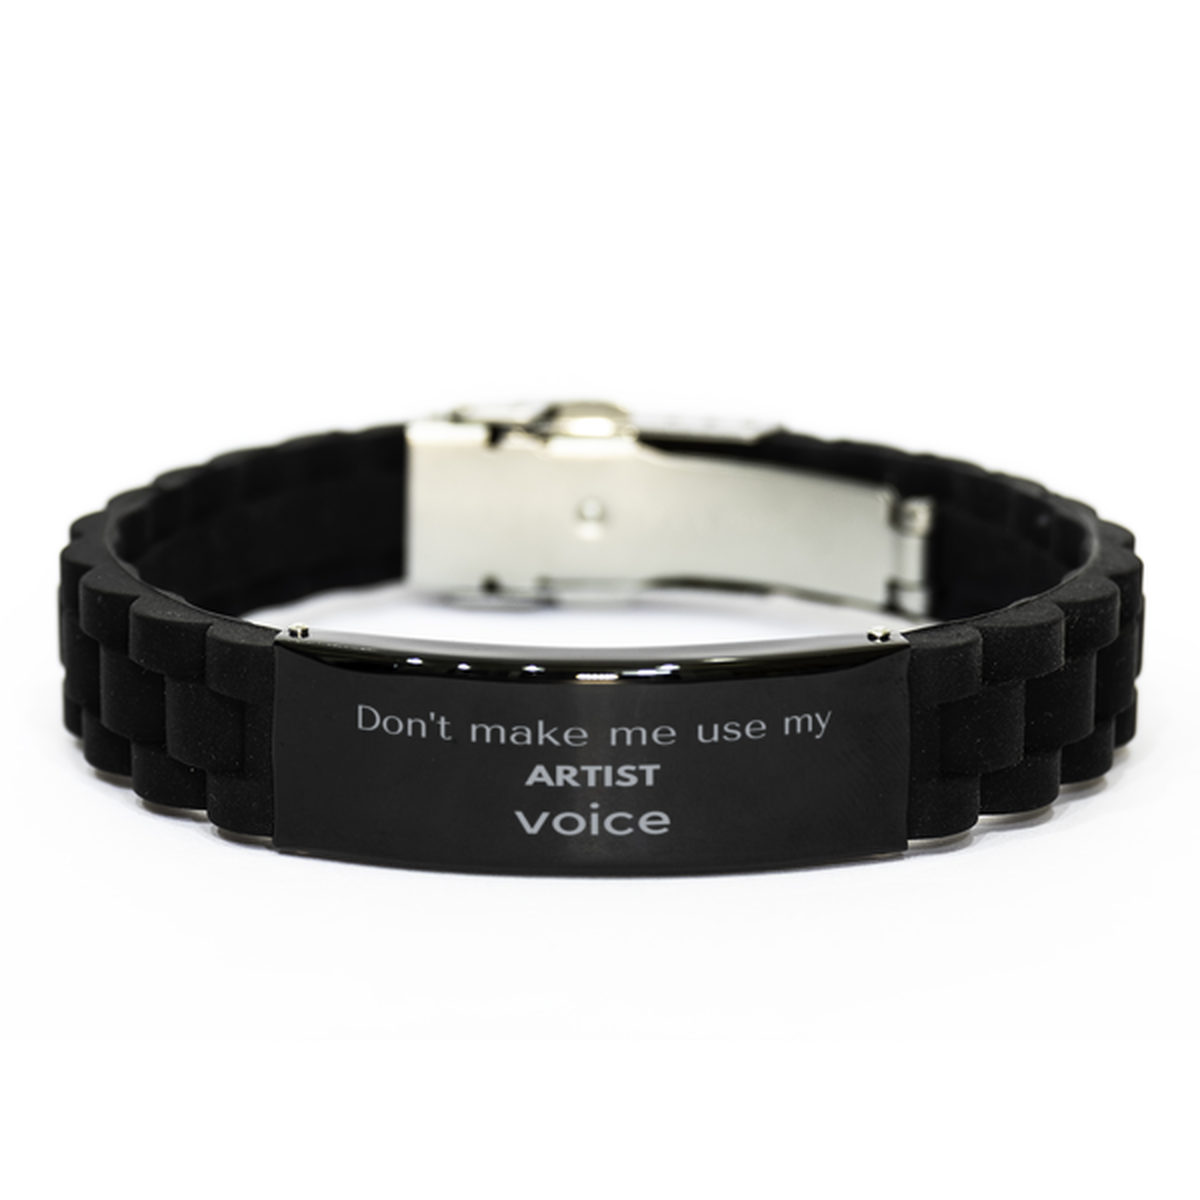 Don't make me use my Artist voice, Sarcasm Artist Gifts, Christmas Artist Black Glidelock Clasp Bracelet Birthday Unique Gifts For Artist Coworkers, Men, Women, Colleague, Friends